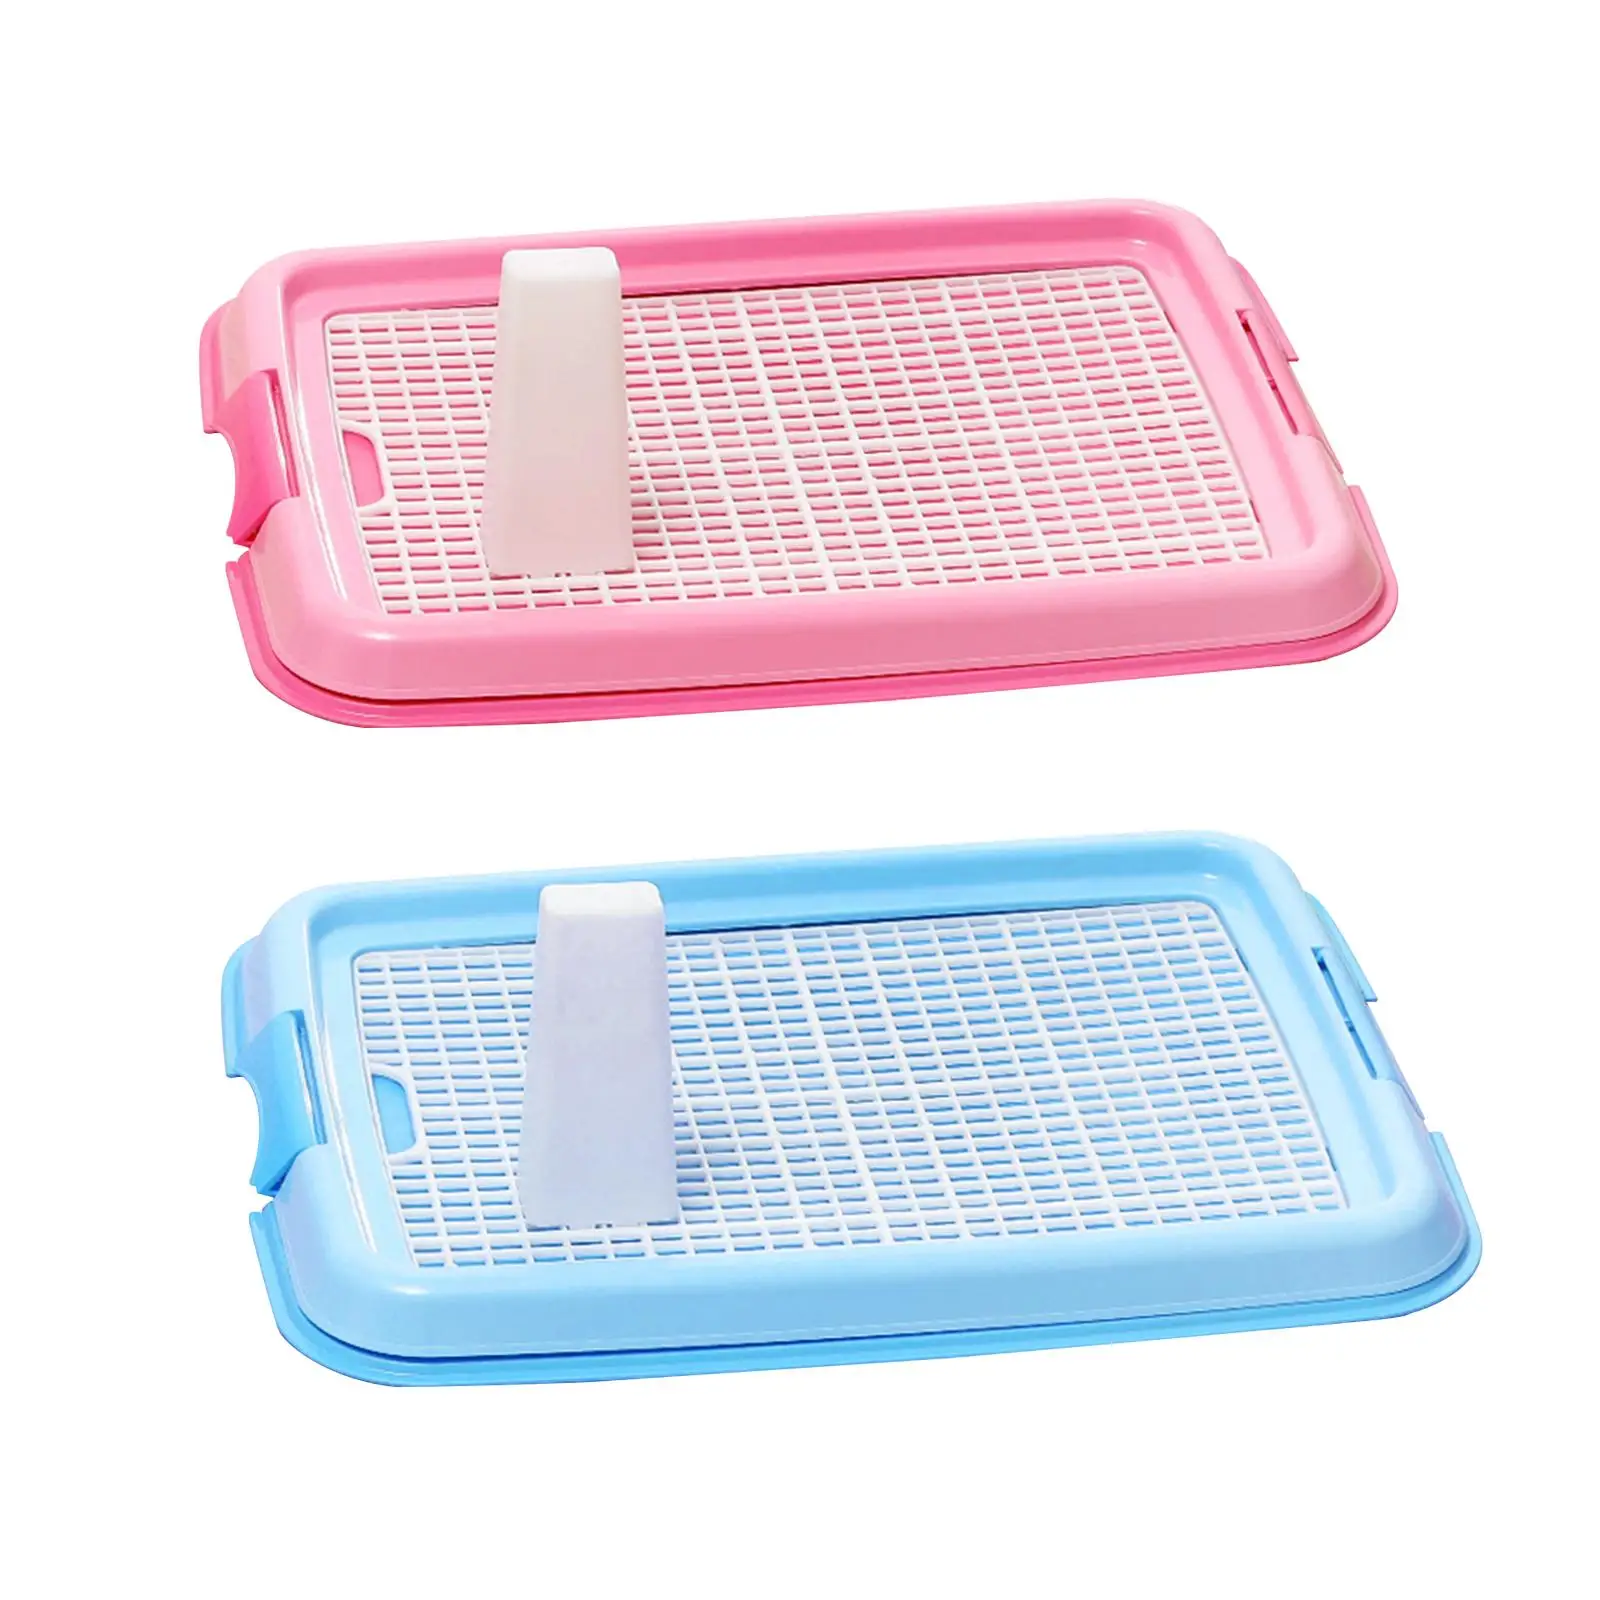 Indoor Dog Toilet Mesh Grids Pee Pad Dog Litter Tray Urinal Bedpan Washable